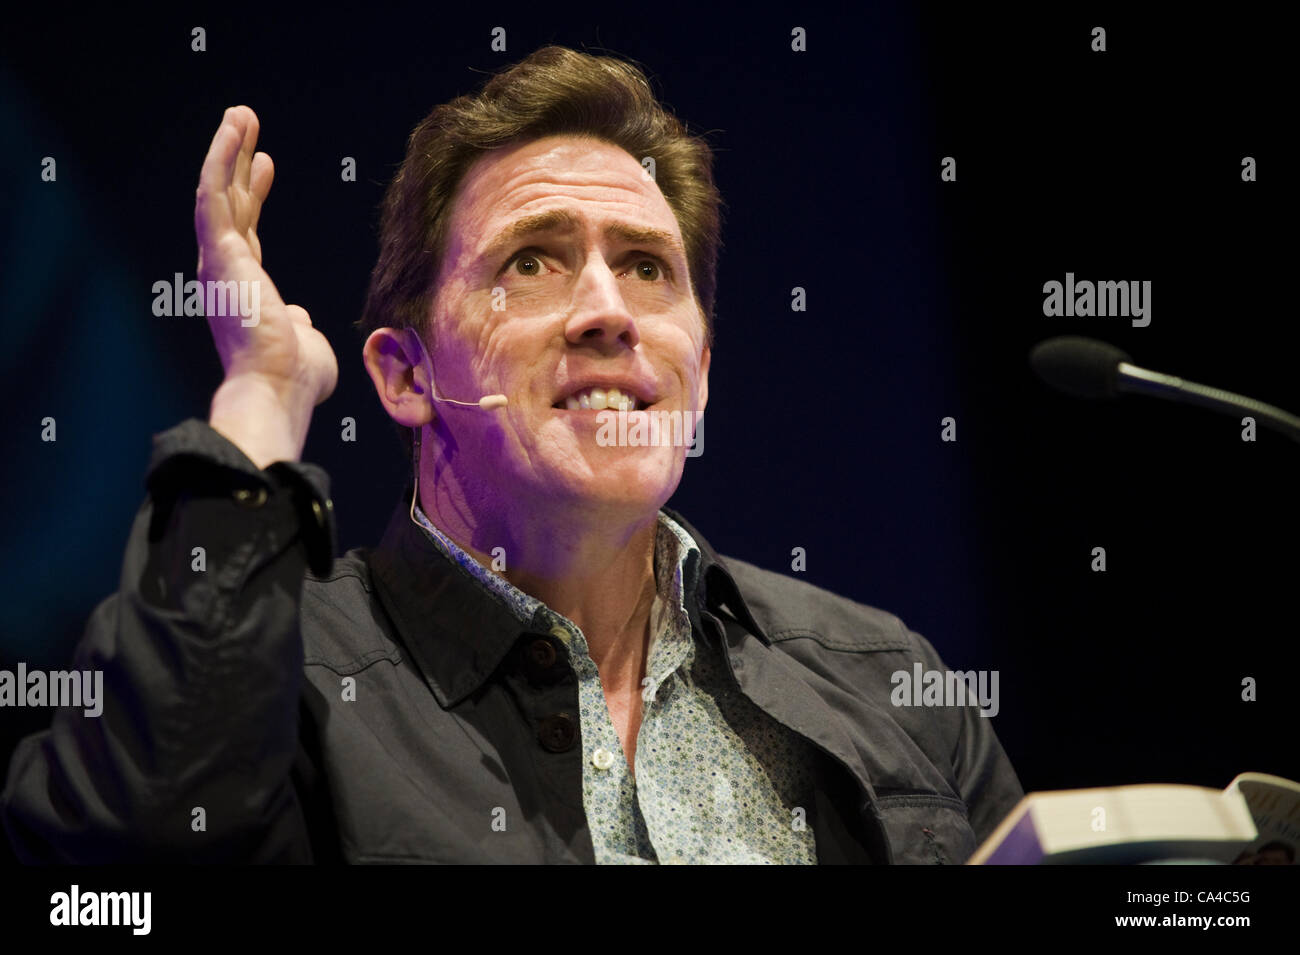 Rob Brydon, Welsh actor comedian and author, speaking at The Telegraph Hay Festival 2012, Hay-on-Wye, Powys, Wales, UK. Stock Photo